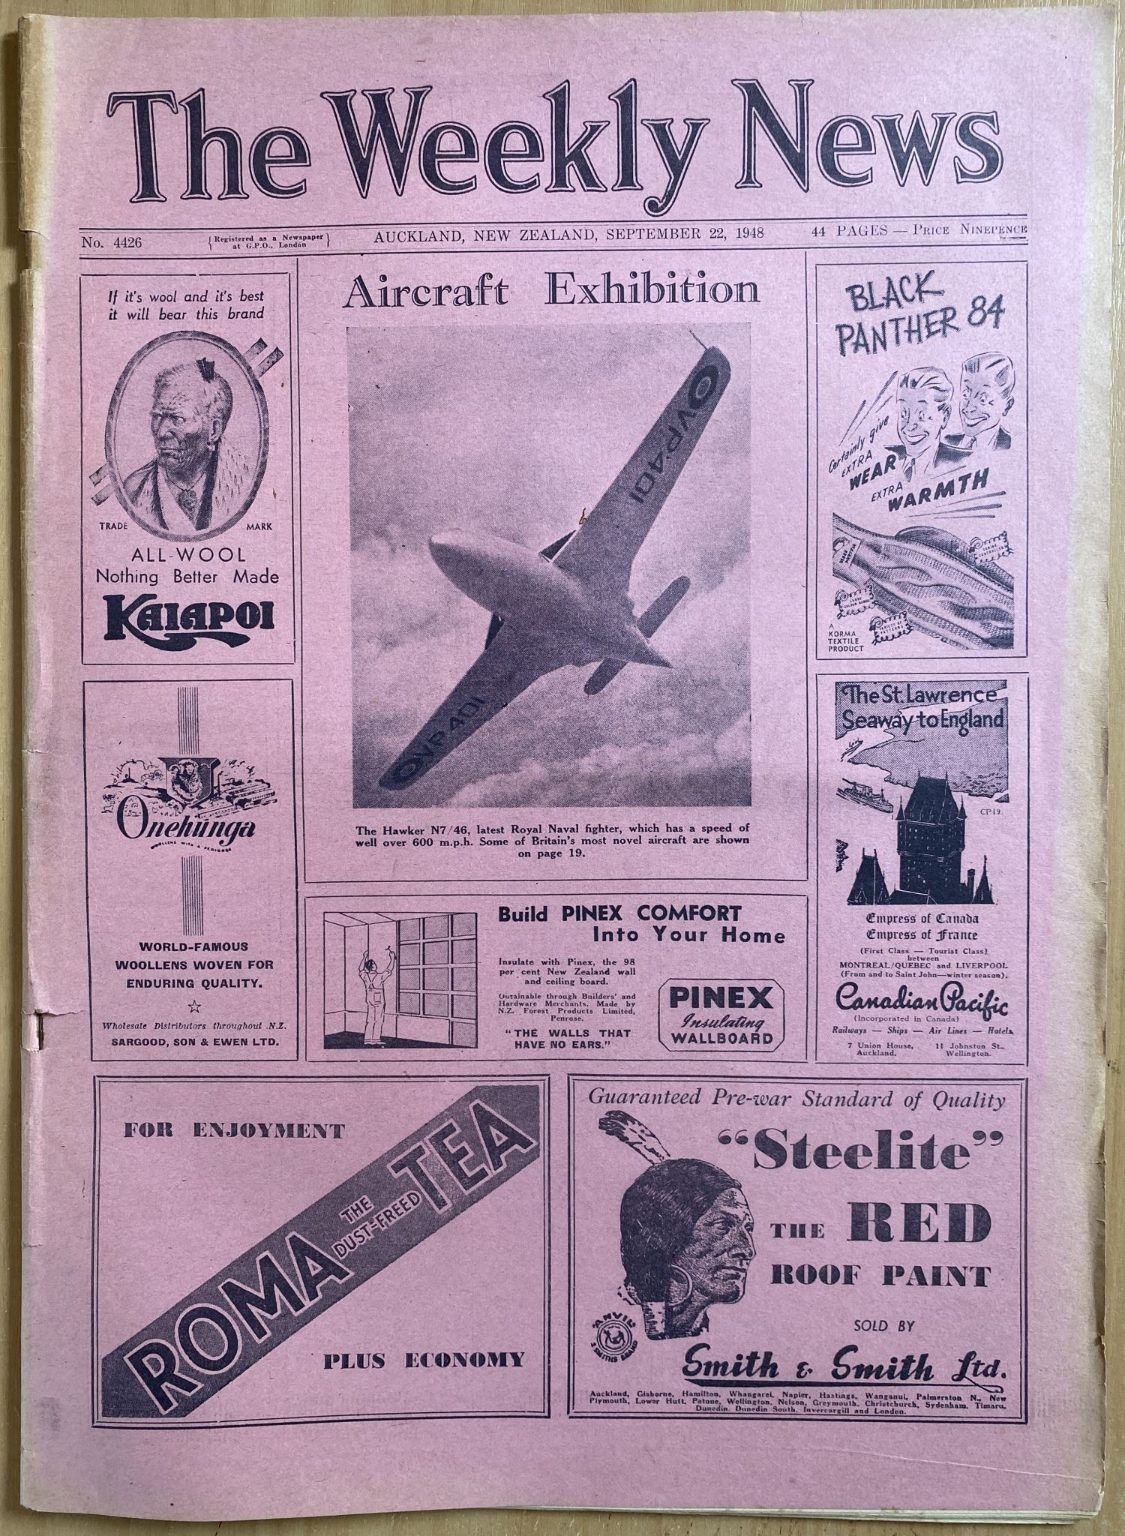 OLD NEWSPAPER: The Weekly News - No. 4426, 22 September 1948